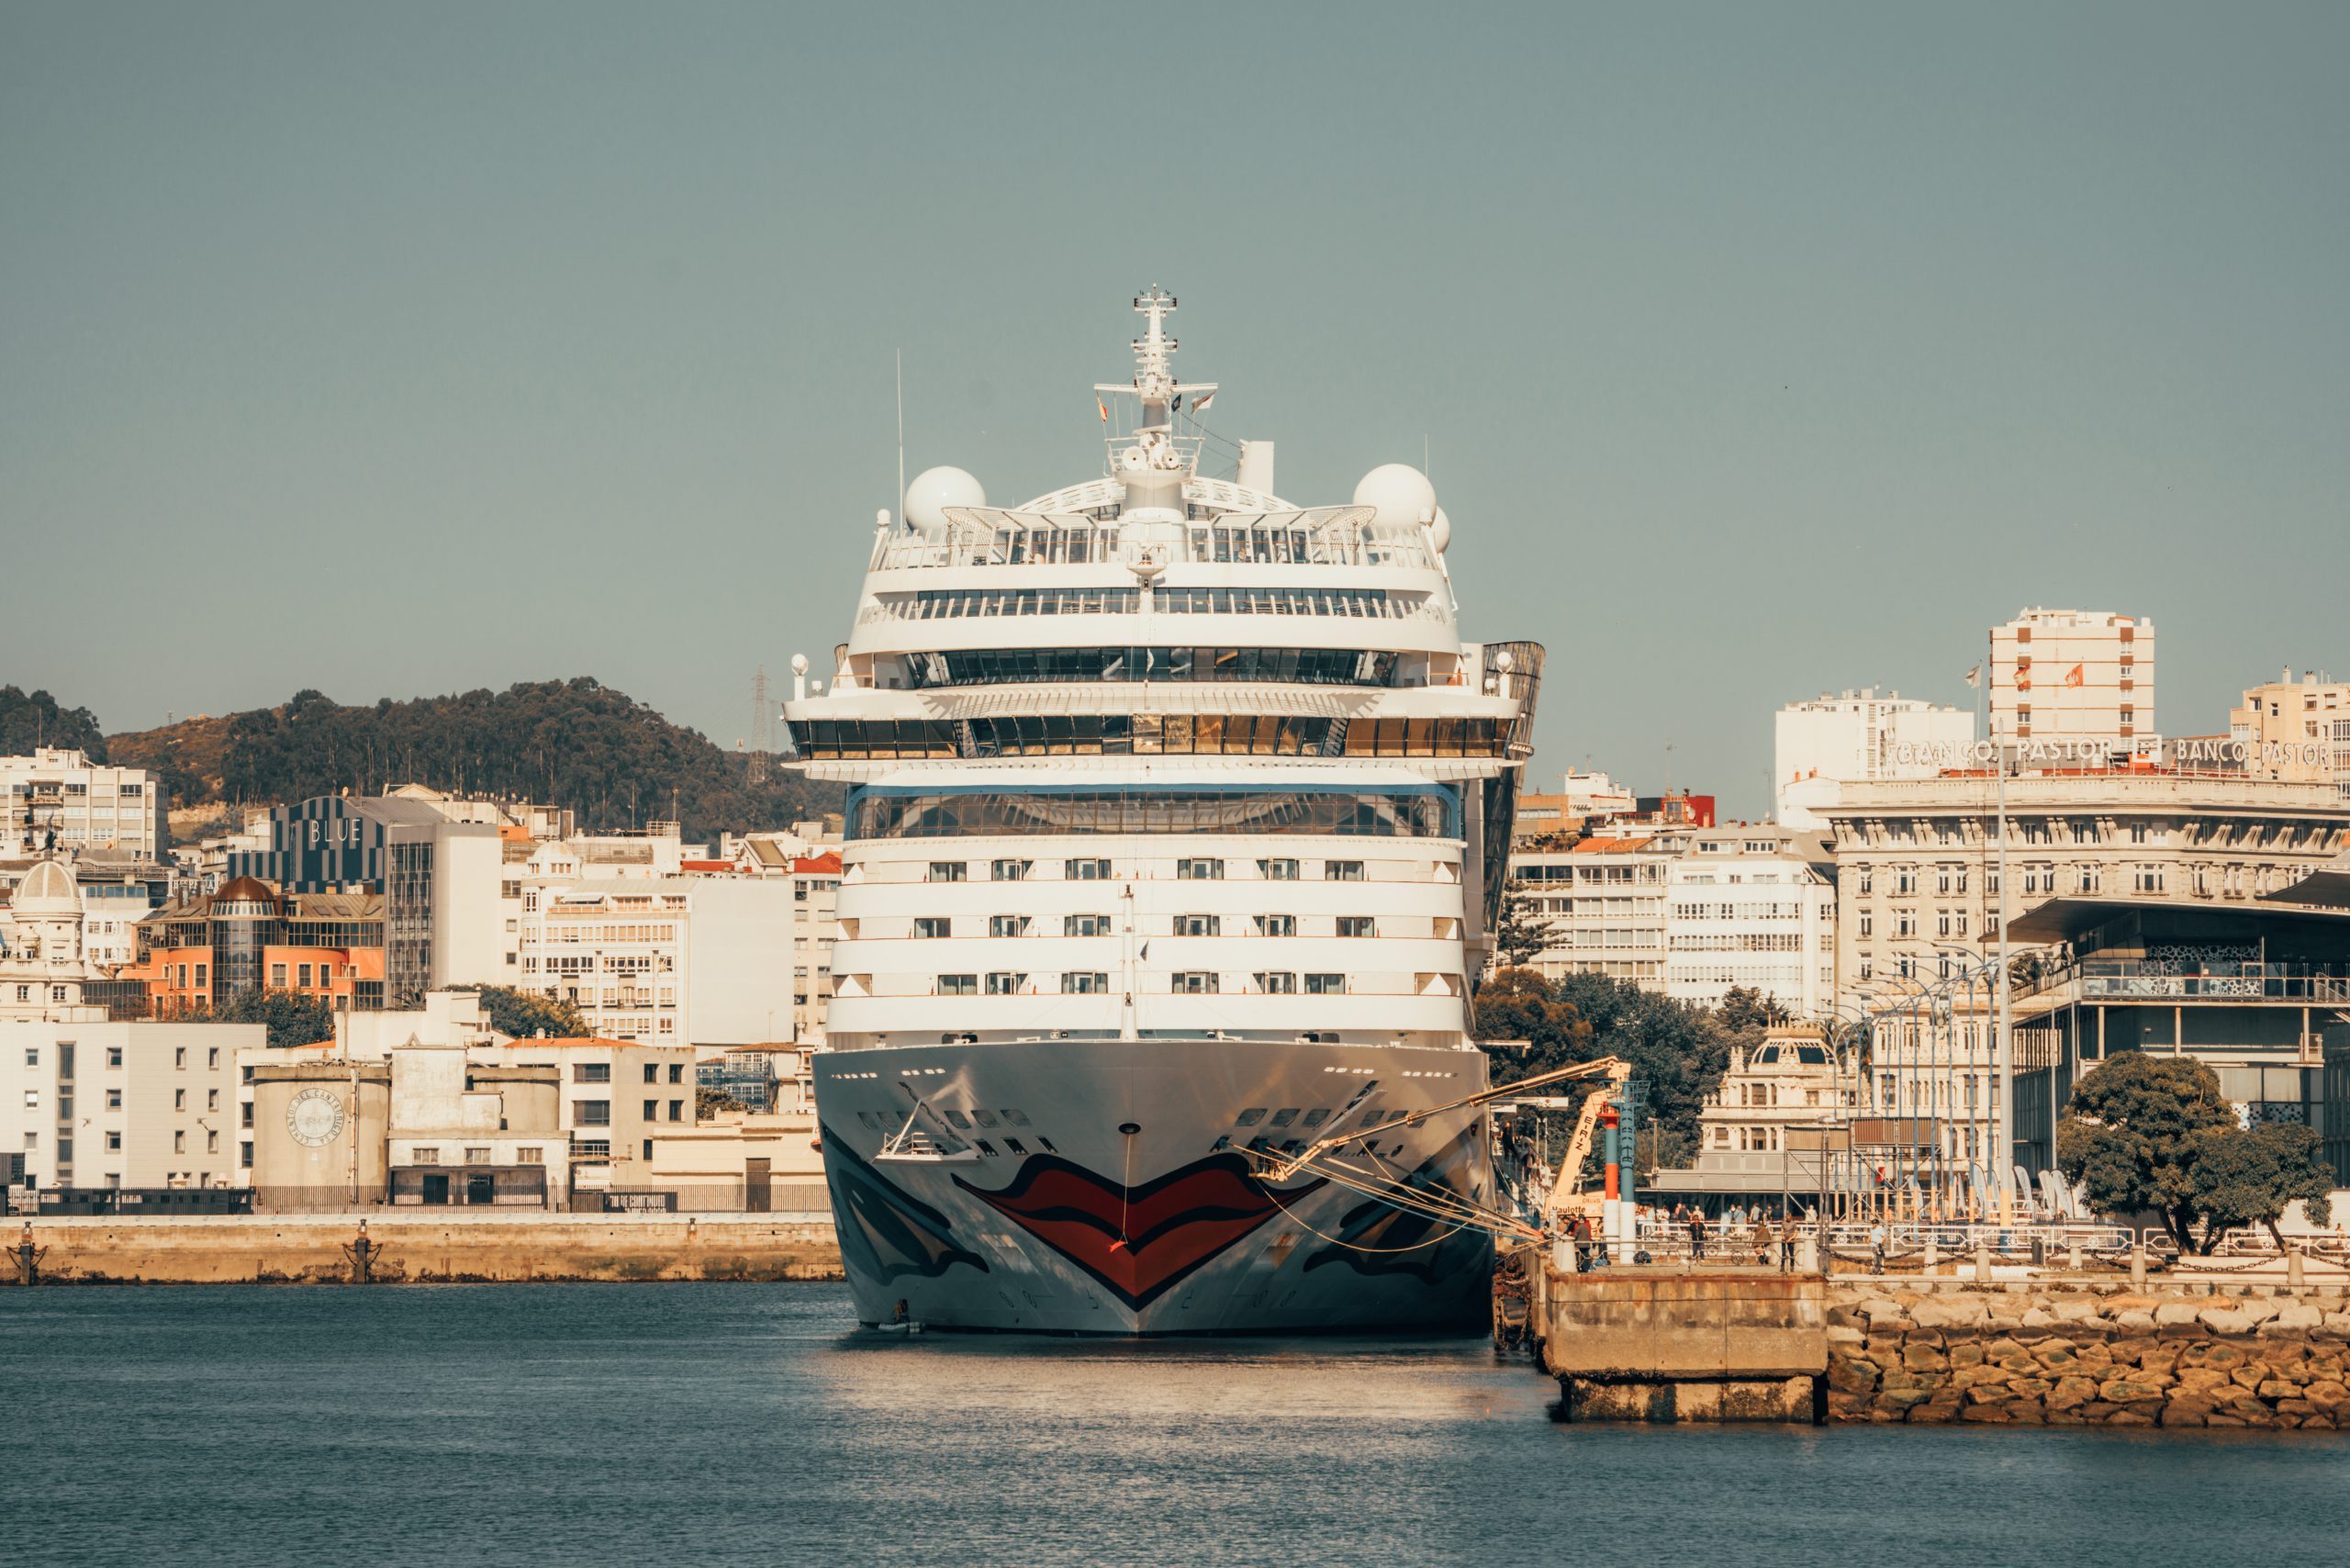 Can cruise ships get clean and eco-friendly?